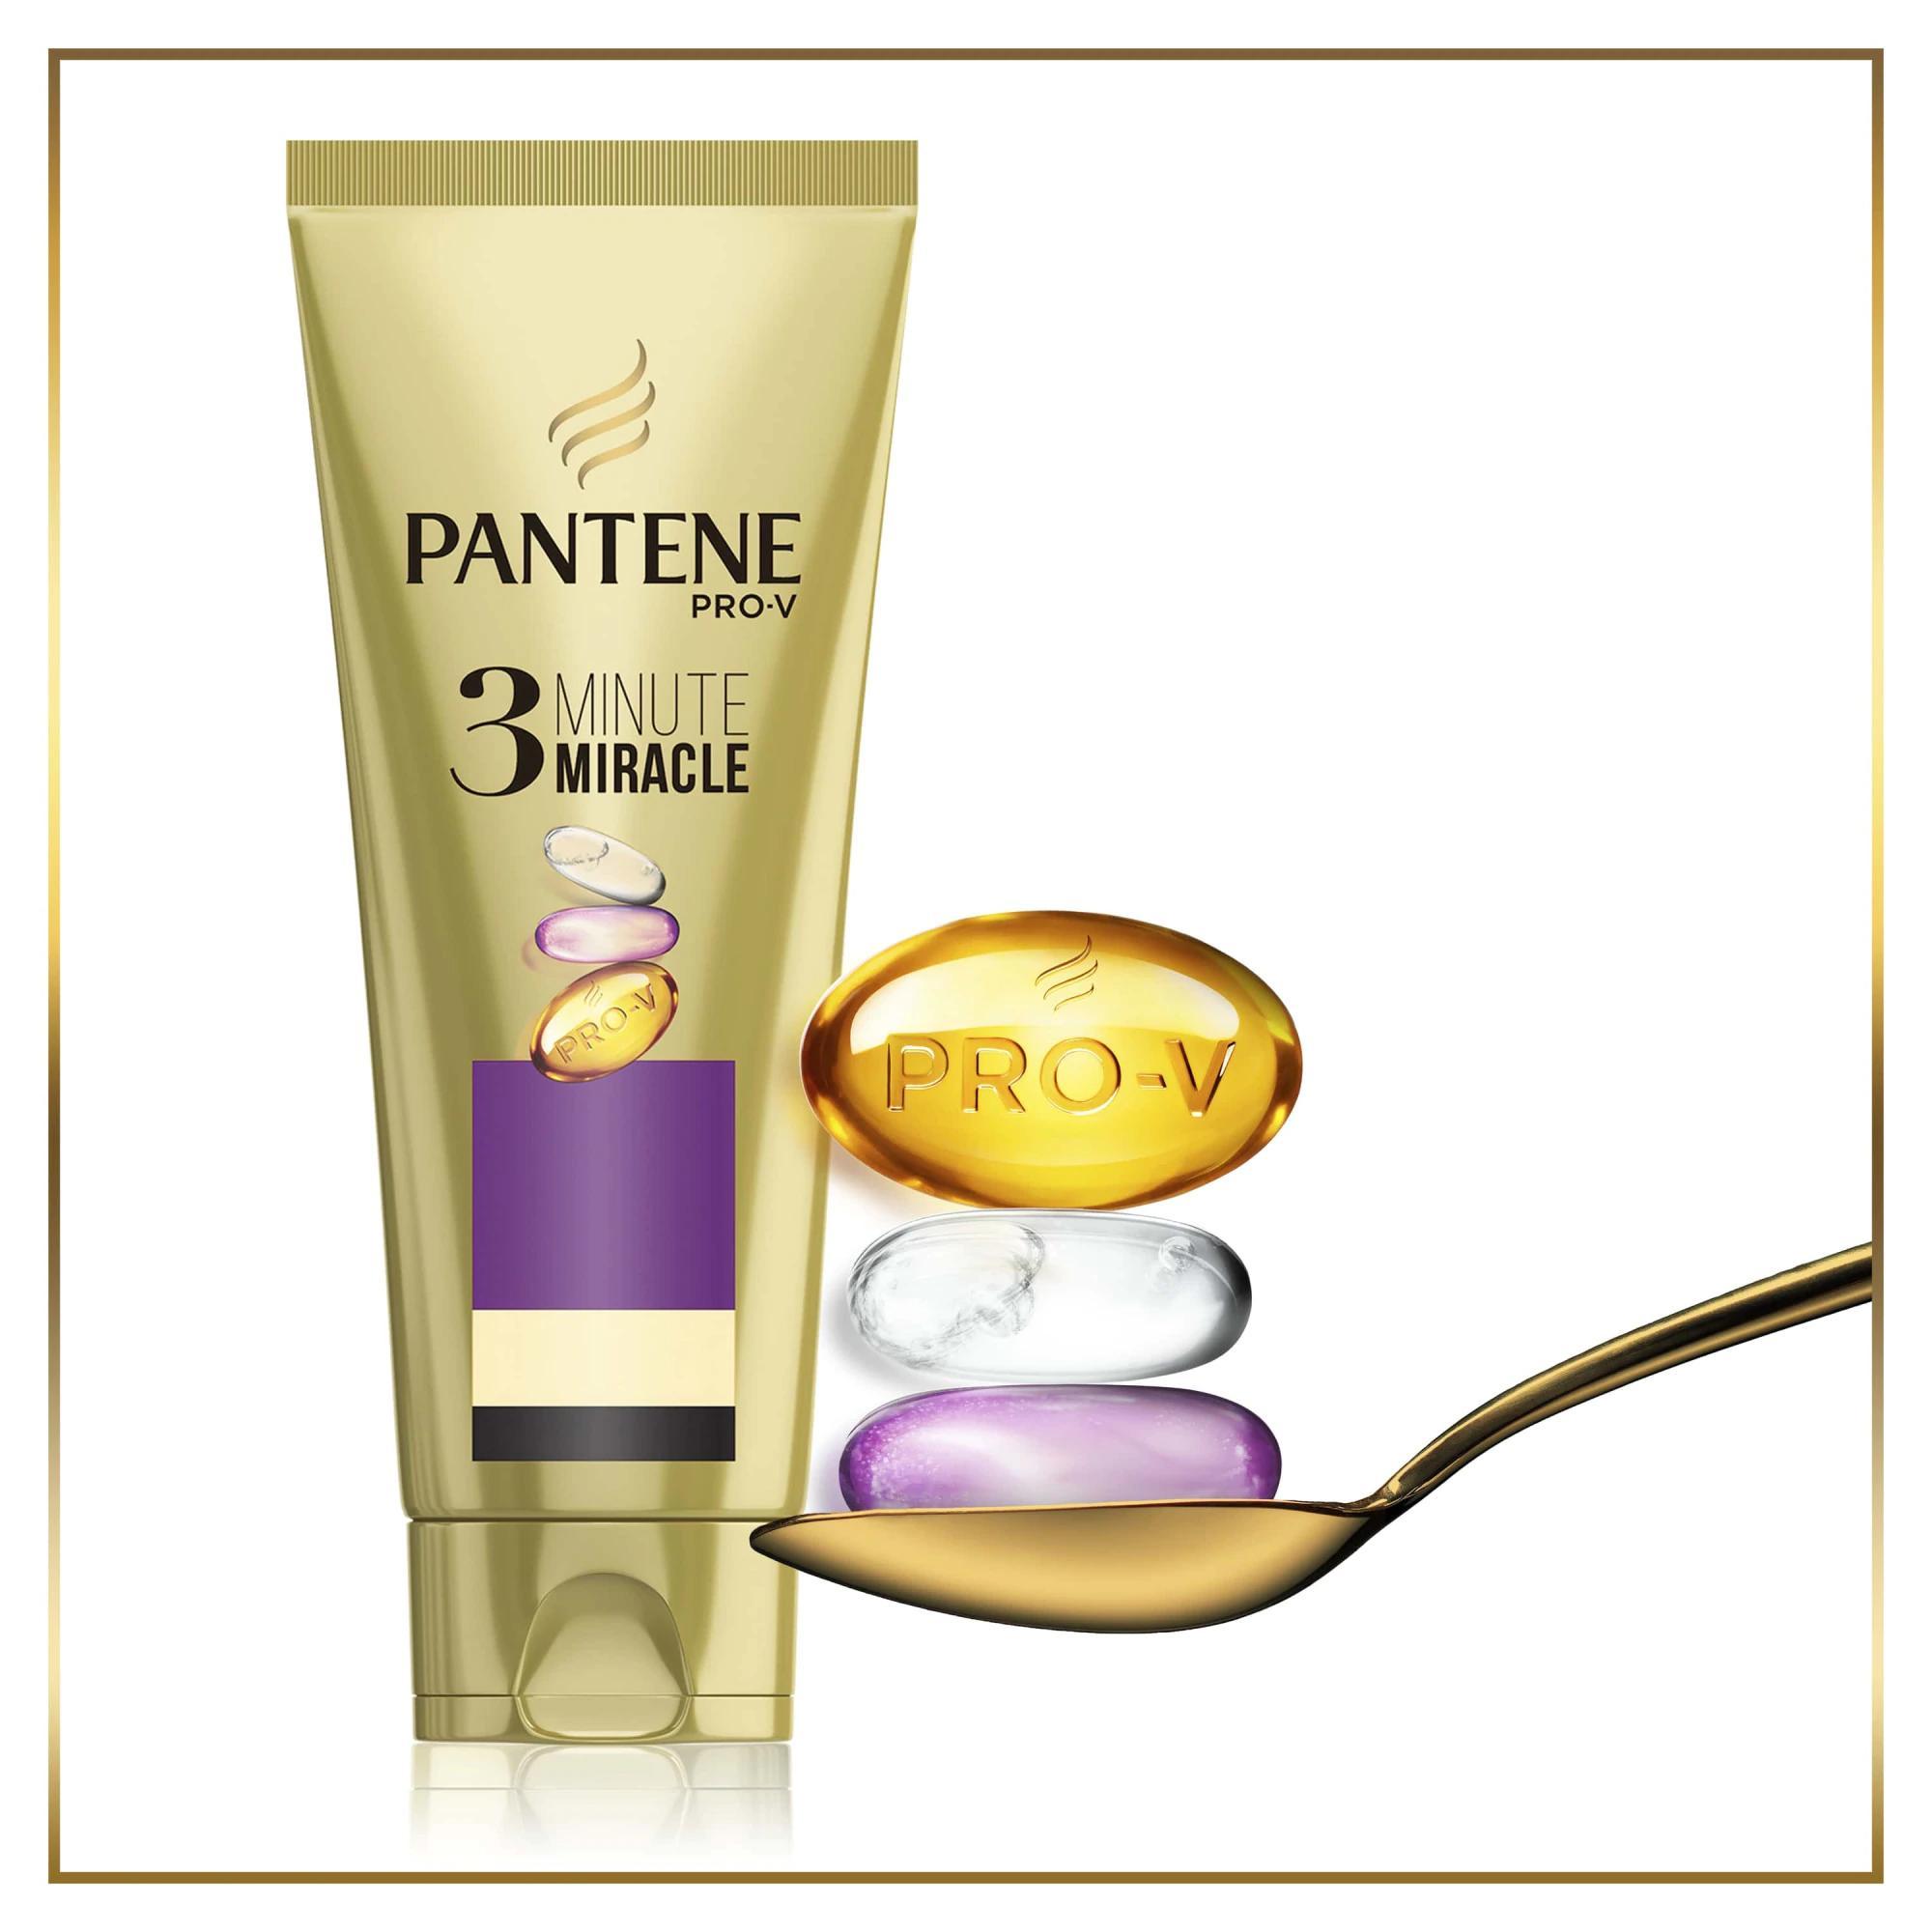 Pantene Pro-V Superfood 3 Minute Miracle Балсам за коса